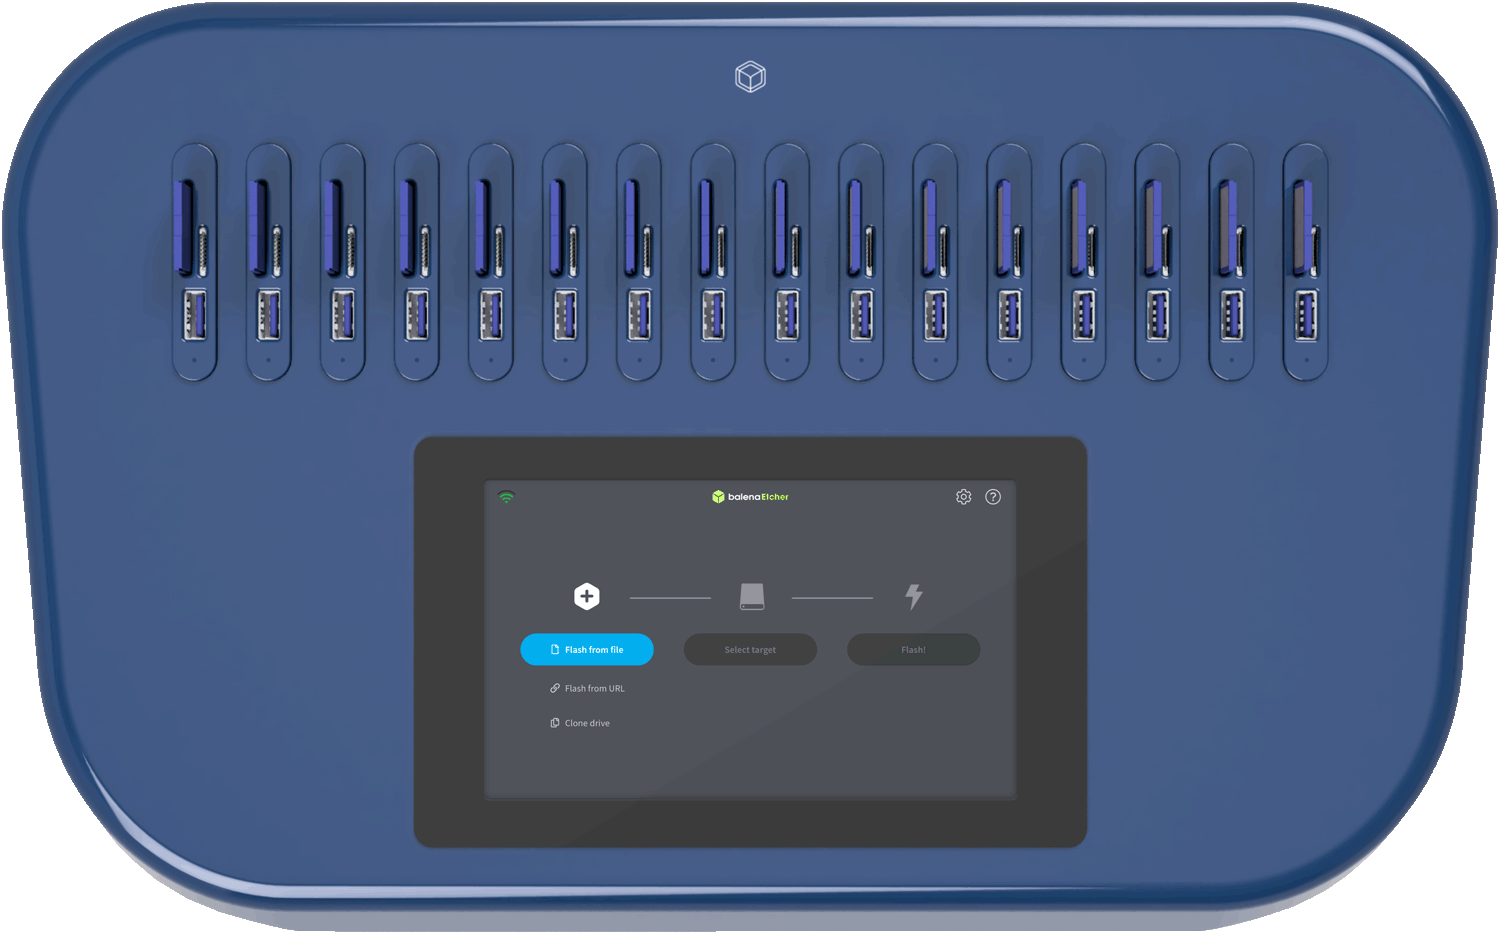 This image shows the Etcher pro using the Etcher software to flash 16 devices at once